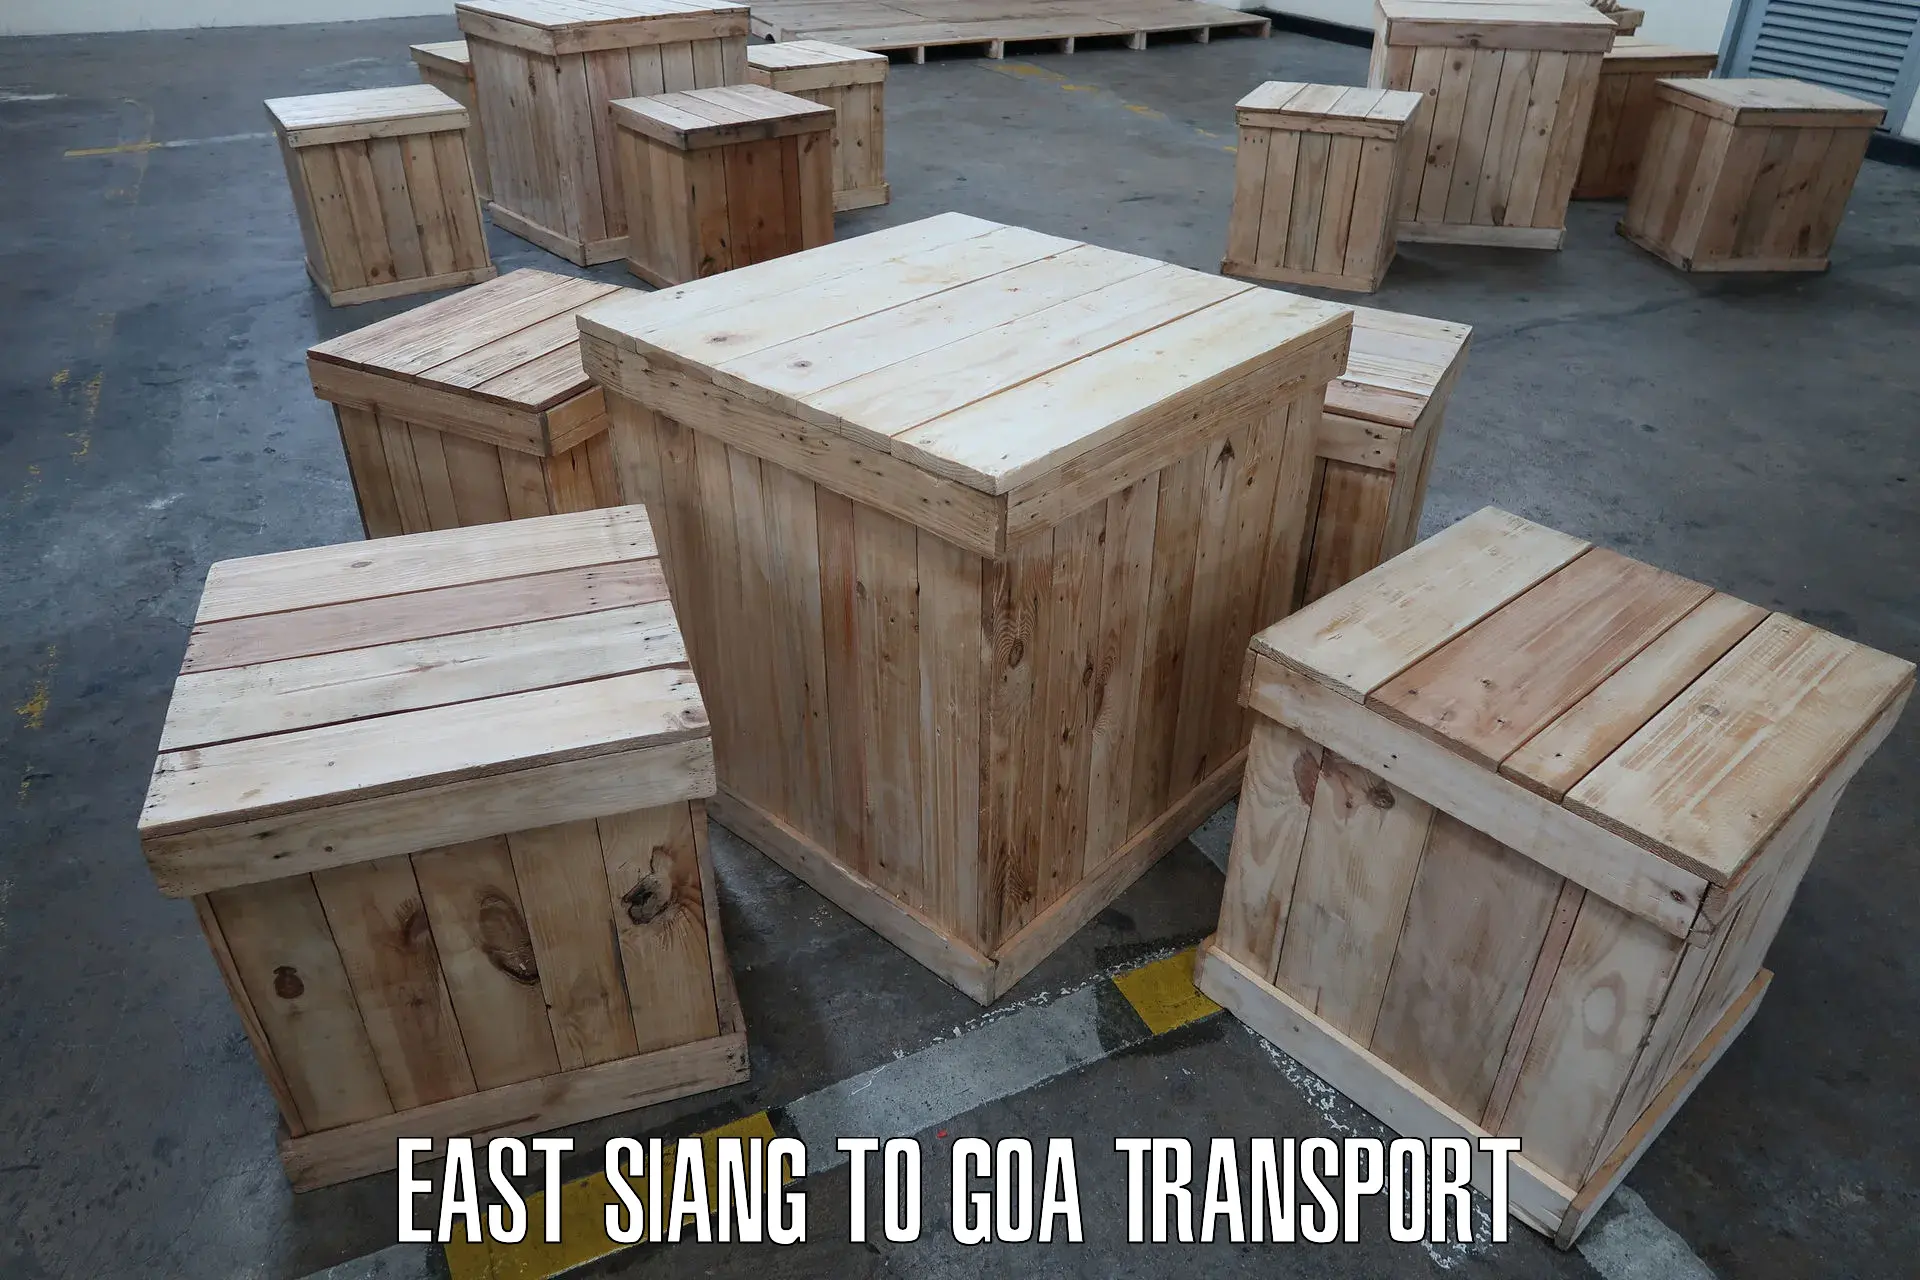 Container transport service East Siang to Goa